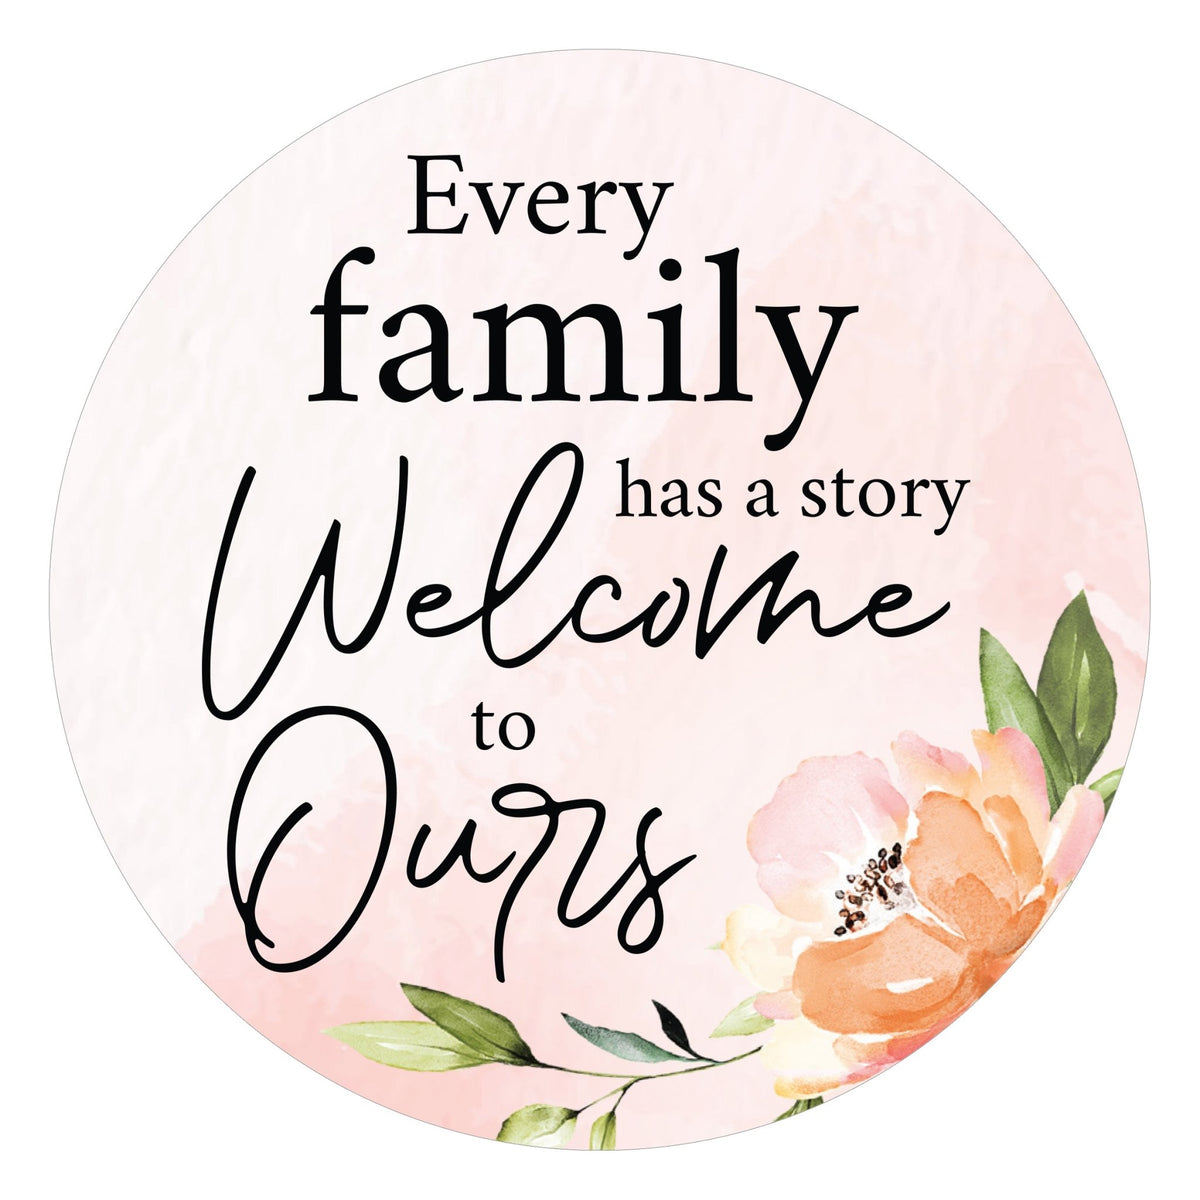 Family &amp; Home Refrigerator Magnet Perfect Gift Idea For Home Décor - Every Family